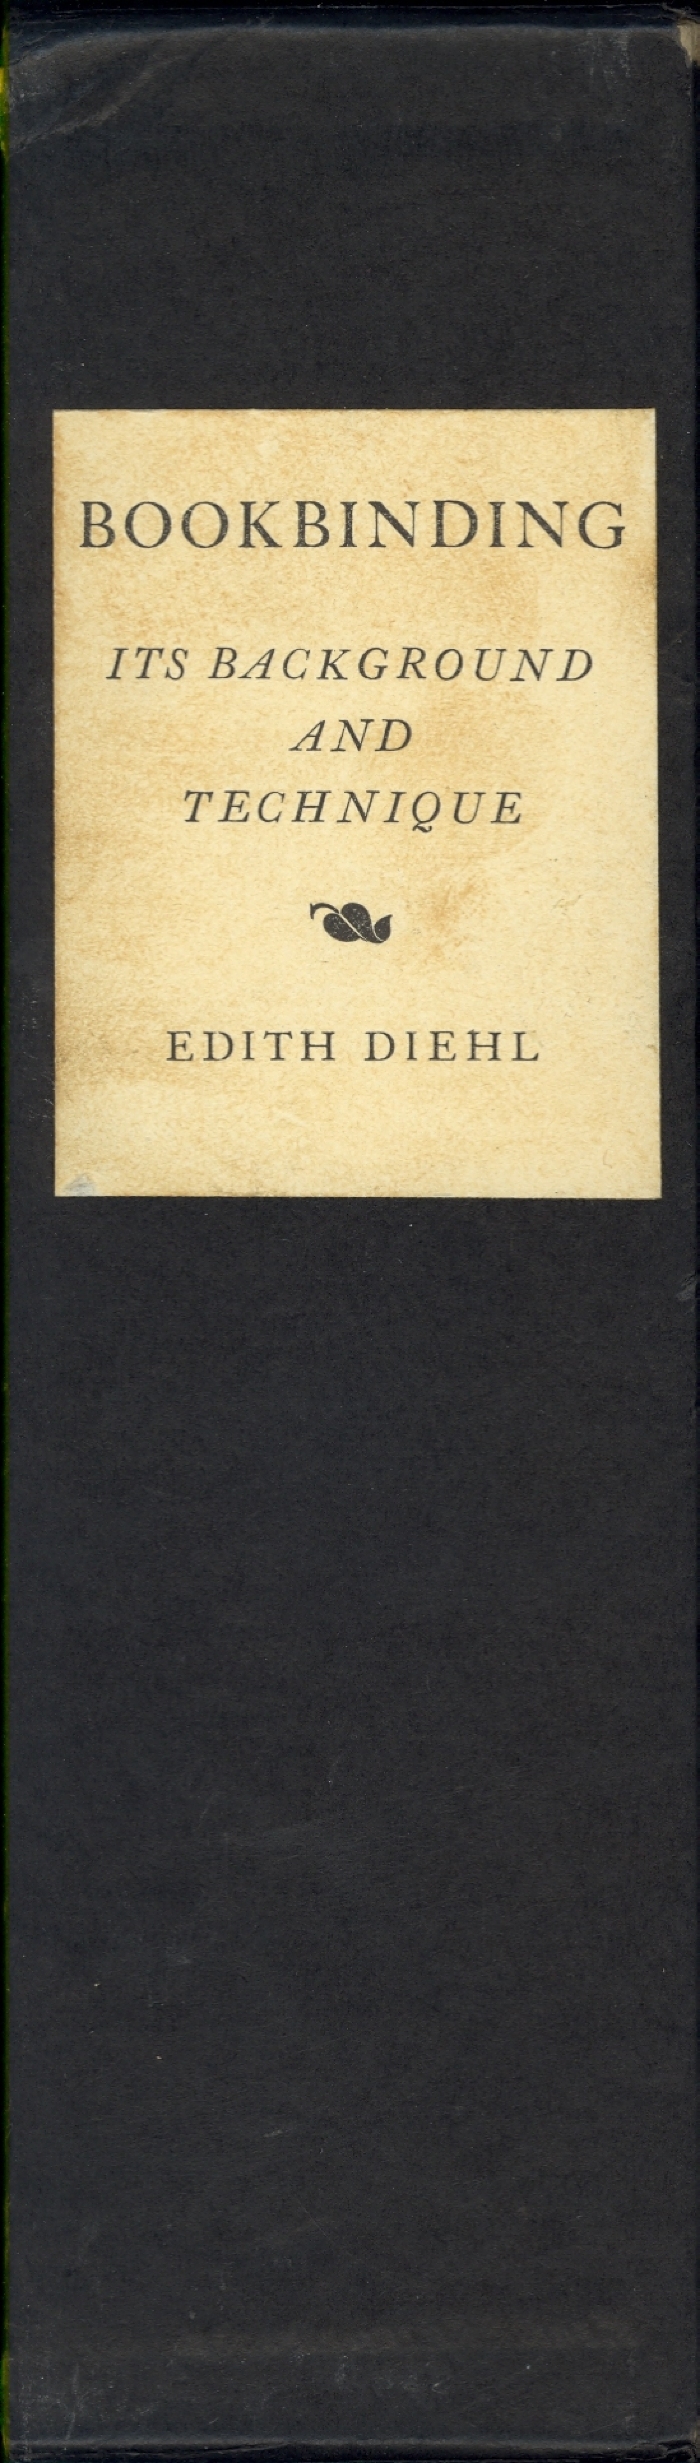 Bookbinding, its background and technique -- Volume I / by Edith Diehl